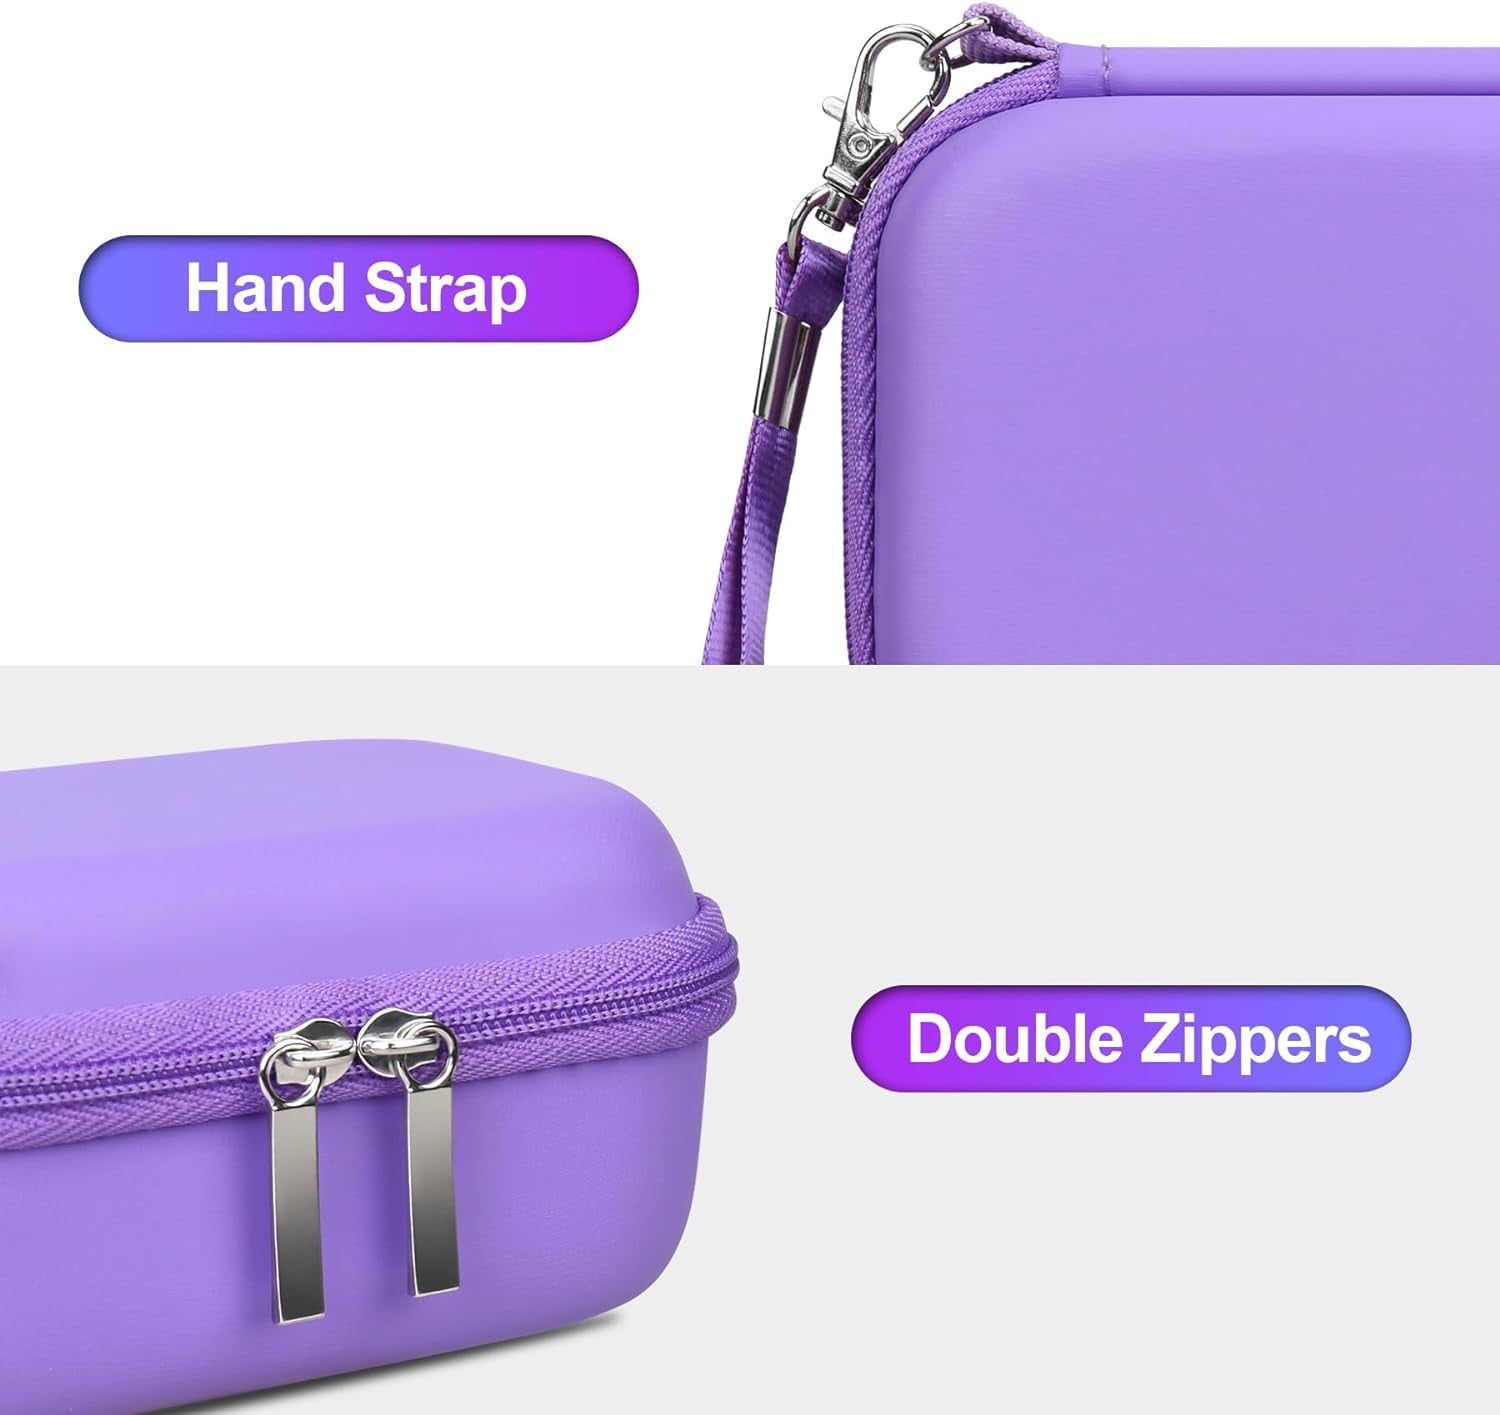  Supmay Hard Carrying Case for Bitzee Interactive Toy Digital  Pet, Gifts For Virtual Pet Enthusiast/Girls & Boys, Protective Storage Case  with Zipper Mesh Pocket for Battery, USB Cable, Purple+Purple : Pet